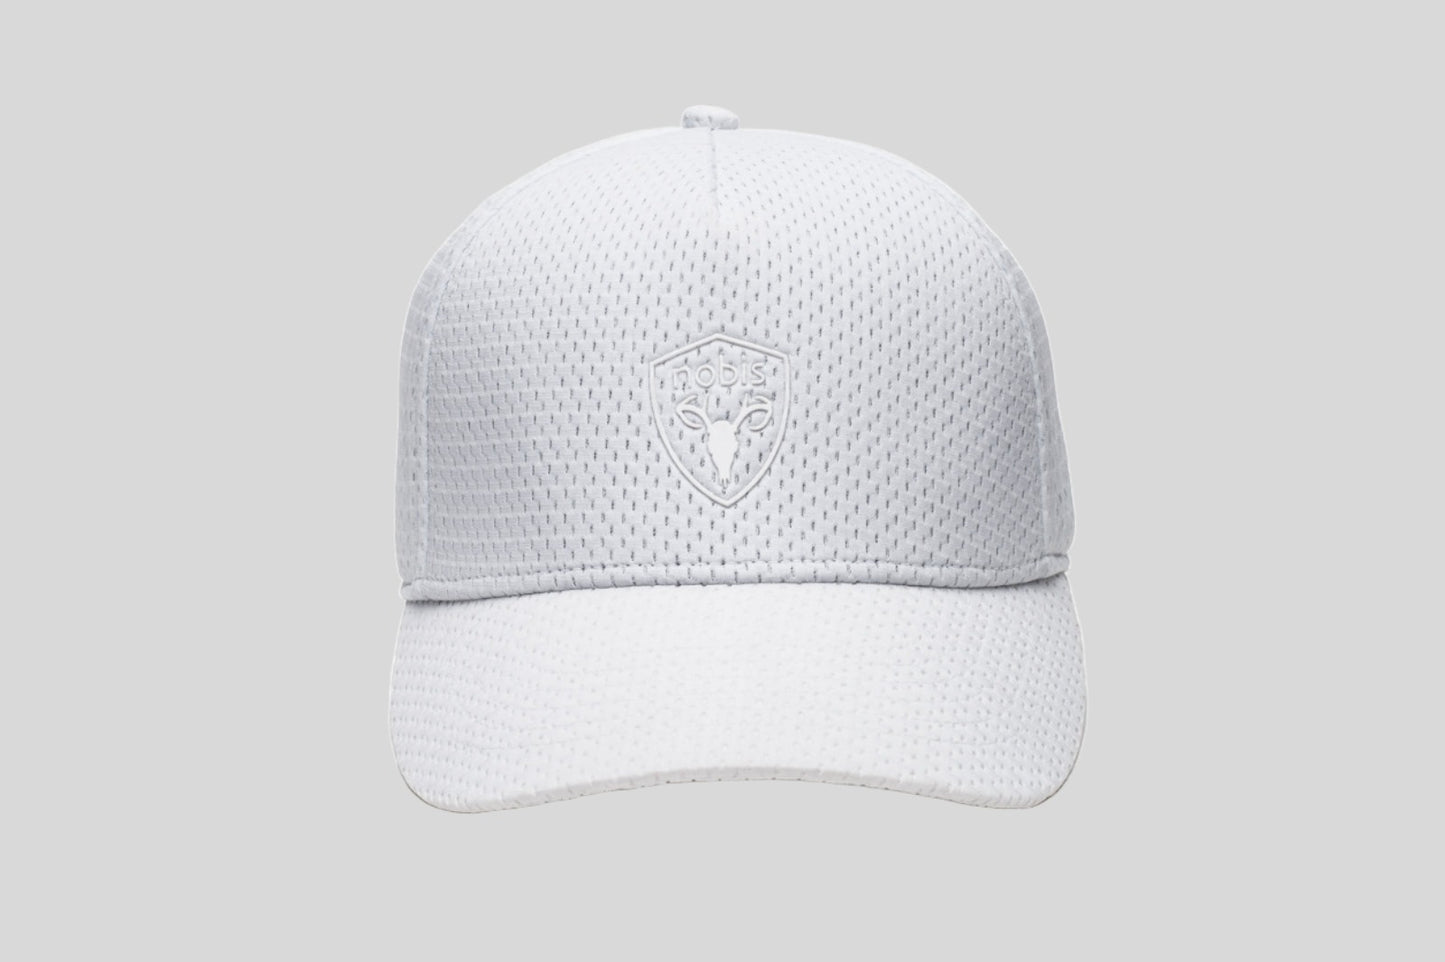 Unisex jersey 5-panel baseball hat with curved brim and adjustable strap at back in White